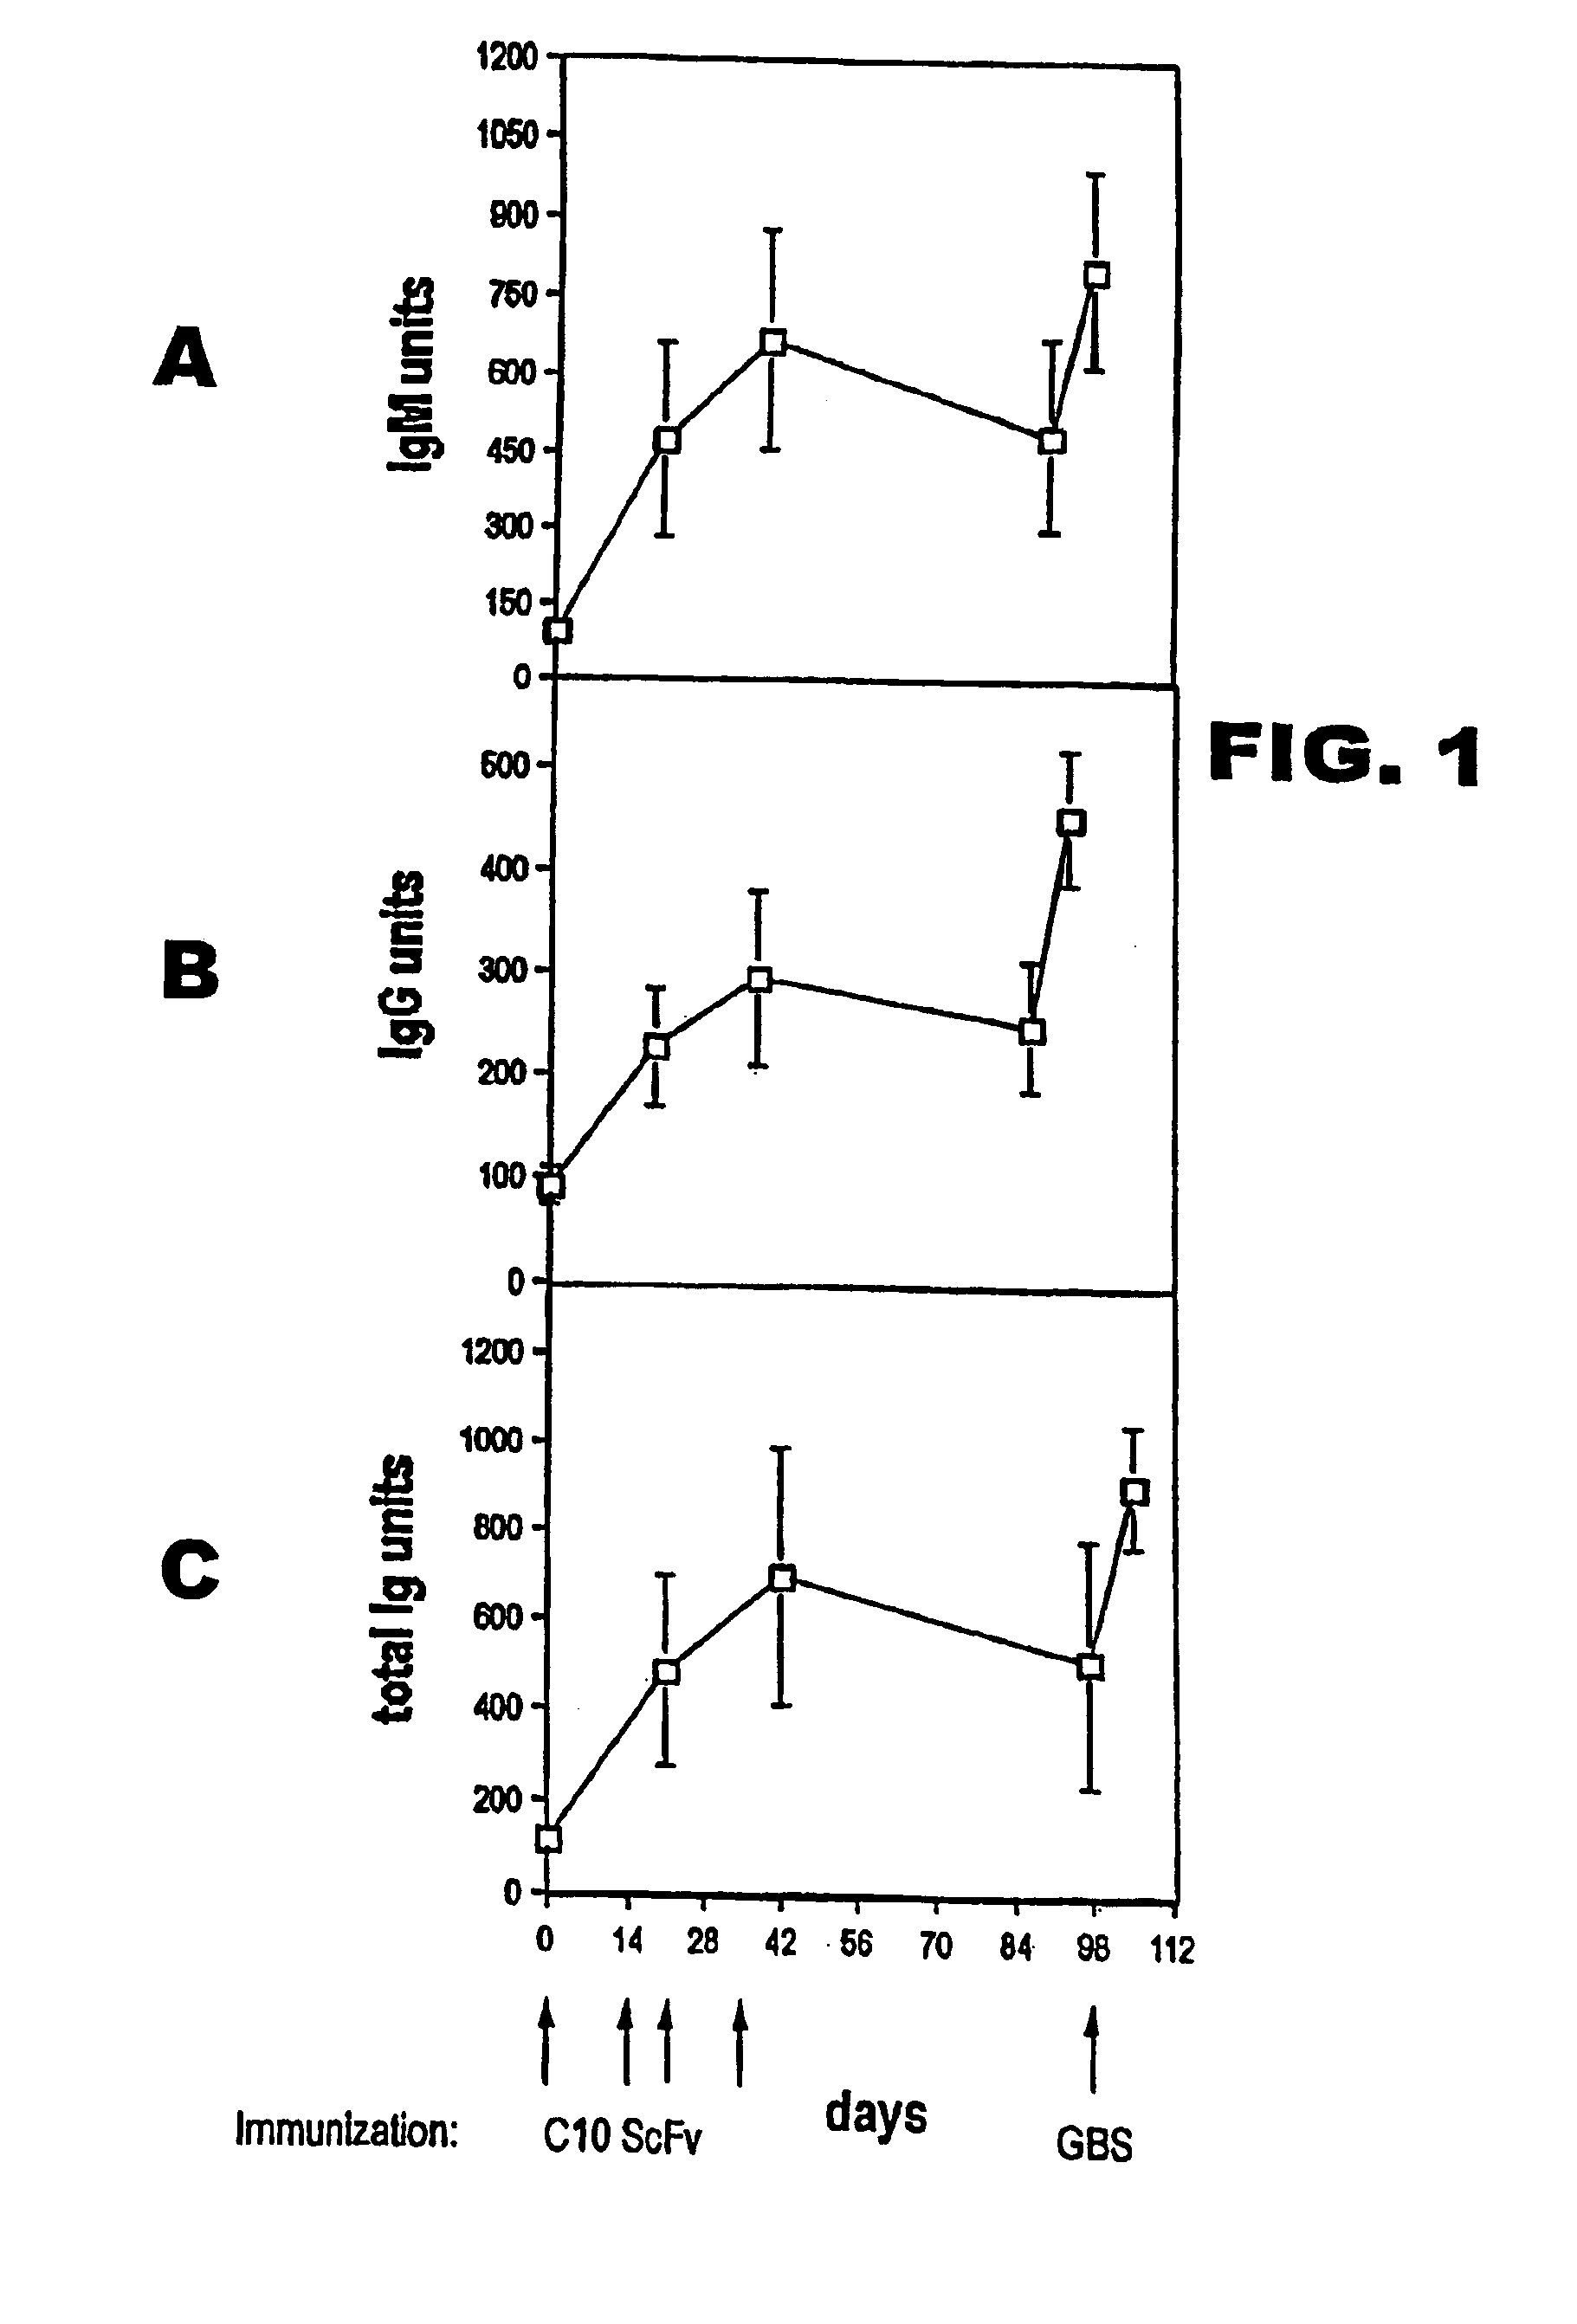 Vaccine formulations comprising antiidiotypic antibodies which immunologically mimic group B streptococcal carbohydrates